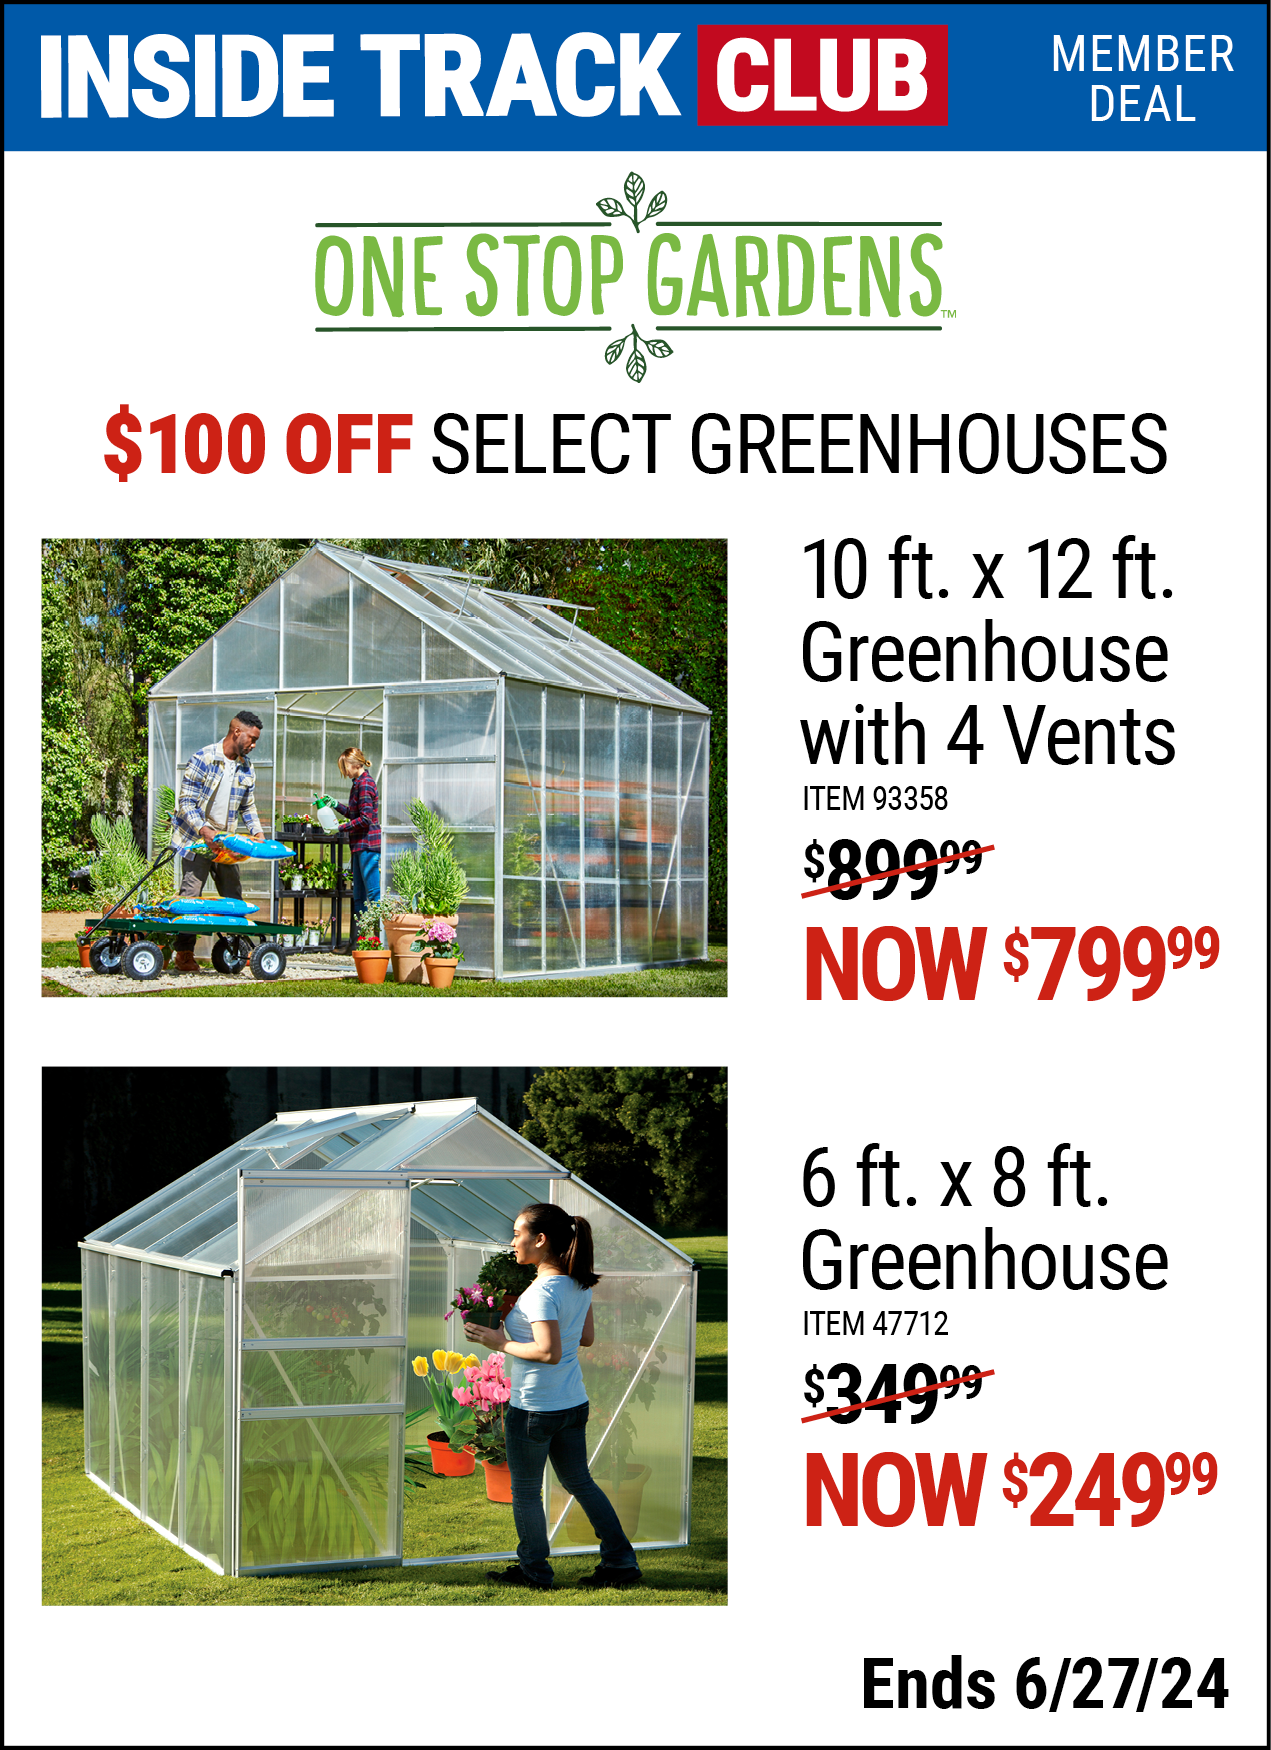 Inside Track Club members can Buy the ONE STOP GARDENS 10 ft. x 12 ft. Greenhouse with 4 Vents (Item 93358/63353) for $799.99, valid through 6/27/2024.